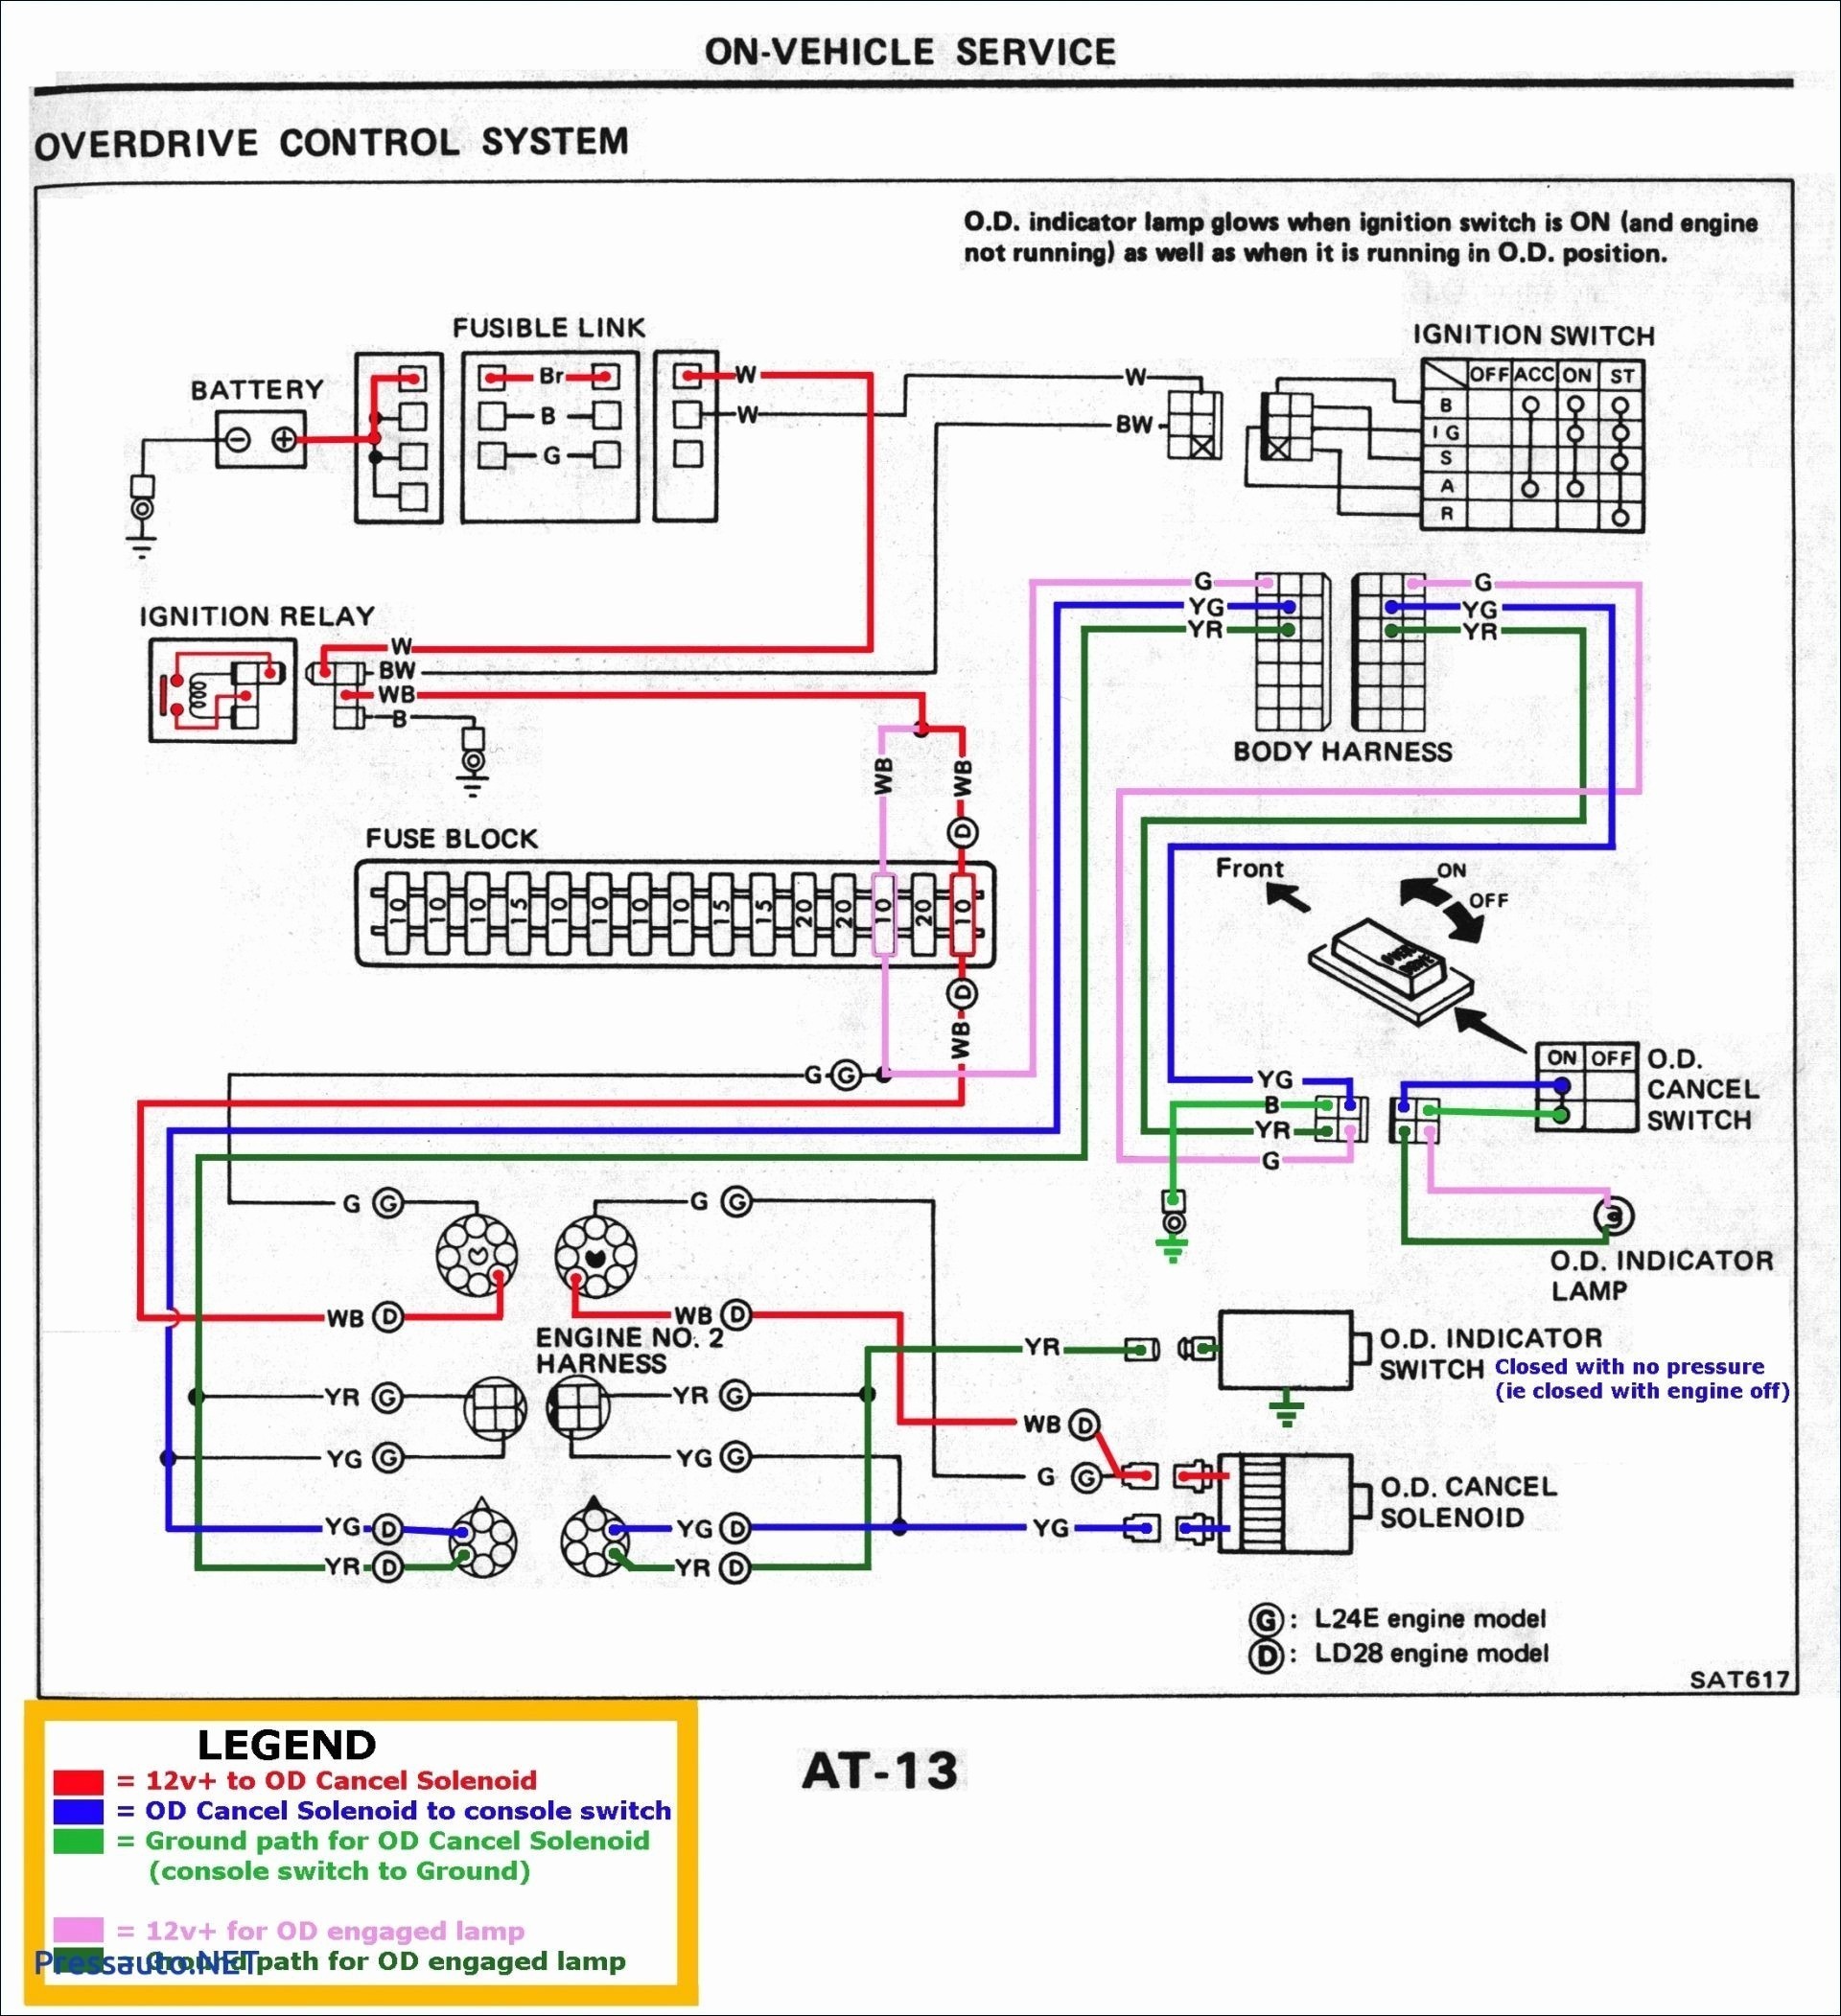 Trailer Plug Wiring Diagram 5 Way Wiring Diagram for Fender 5 Way Switch Valid Rotary Switch Wiring Of Trailer Plug Wiring Diagram 5 Way